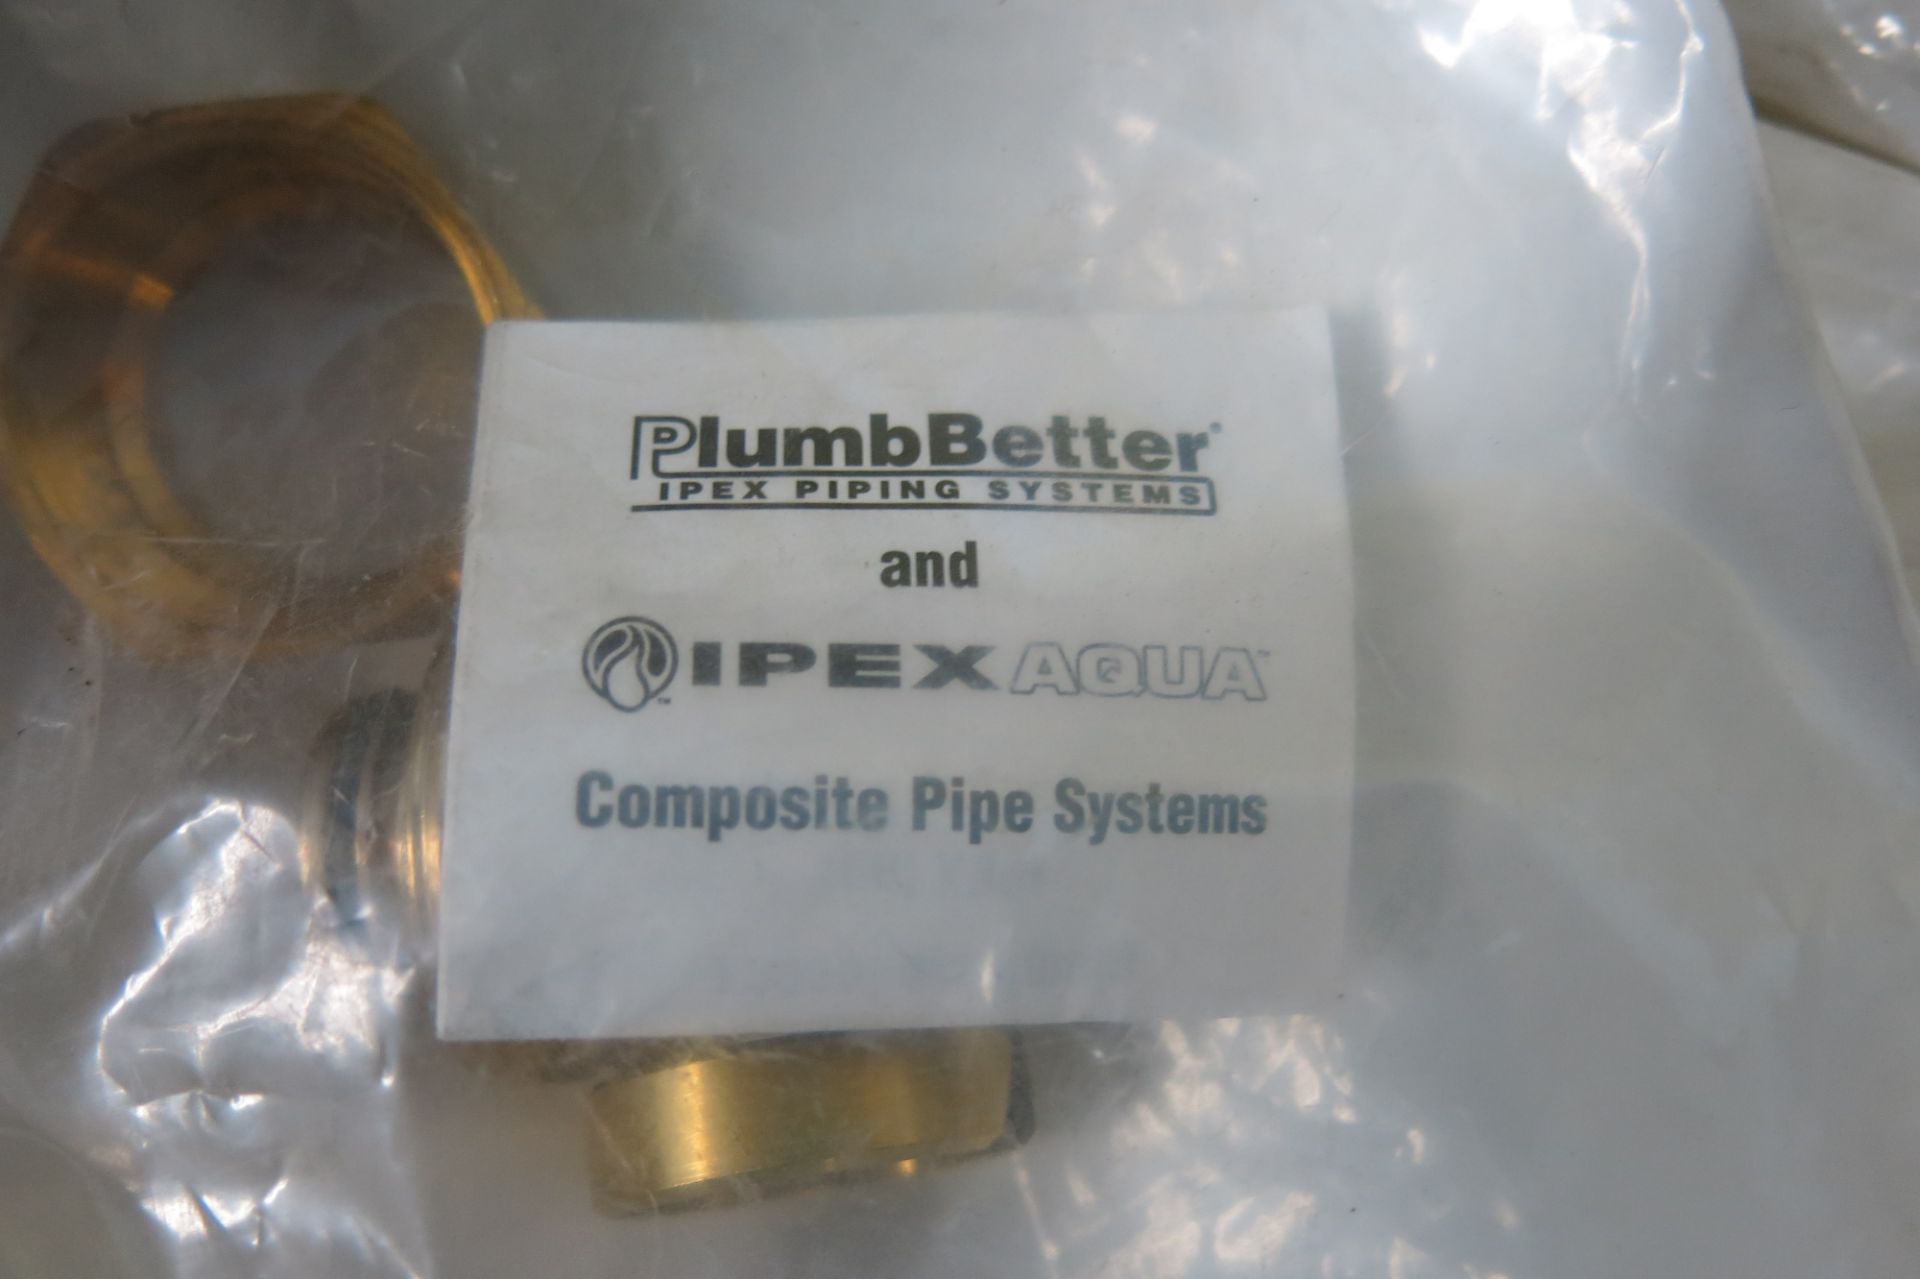 LOT OF COMPRESSION PIPE FITTINGS - NEW (LOCATED IN MISSISSAUGA) - Image 2 of 2